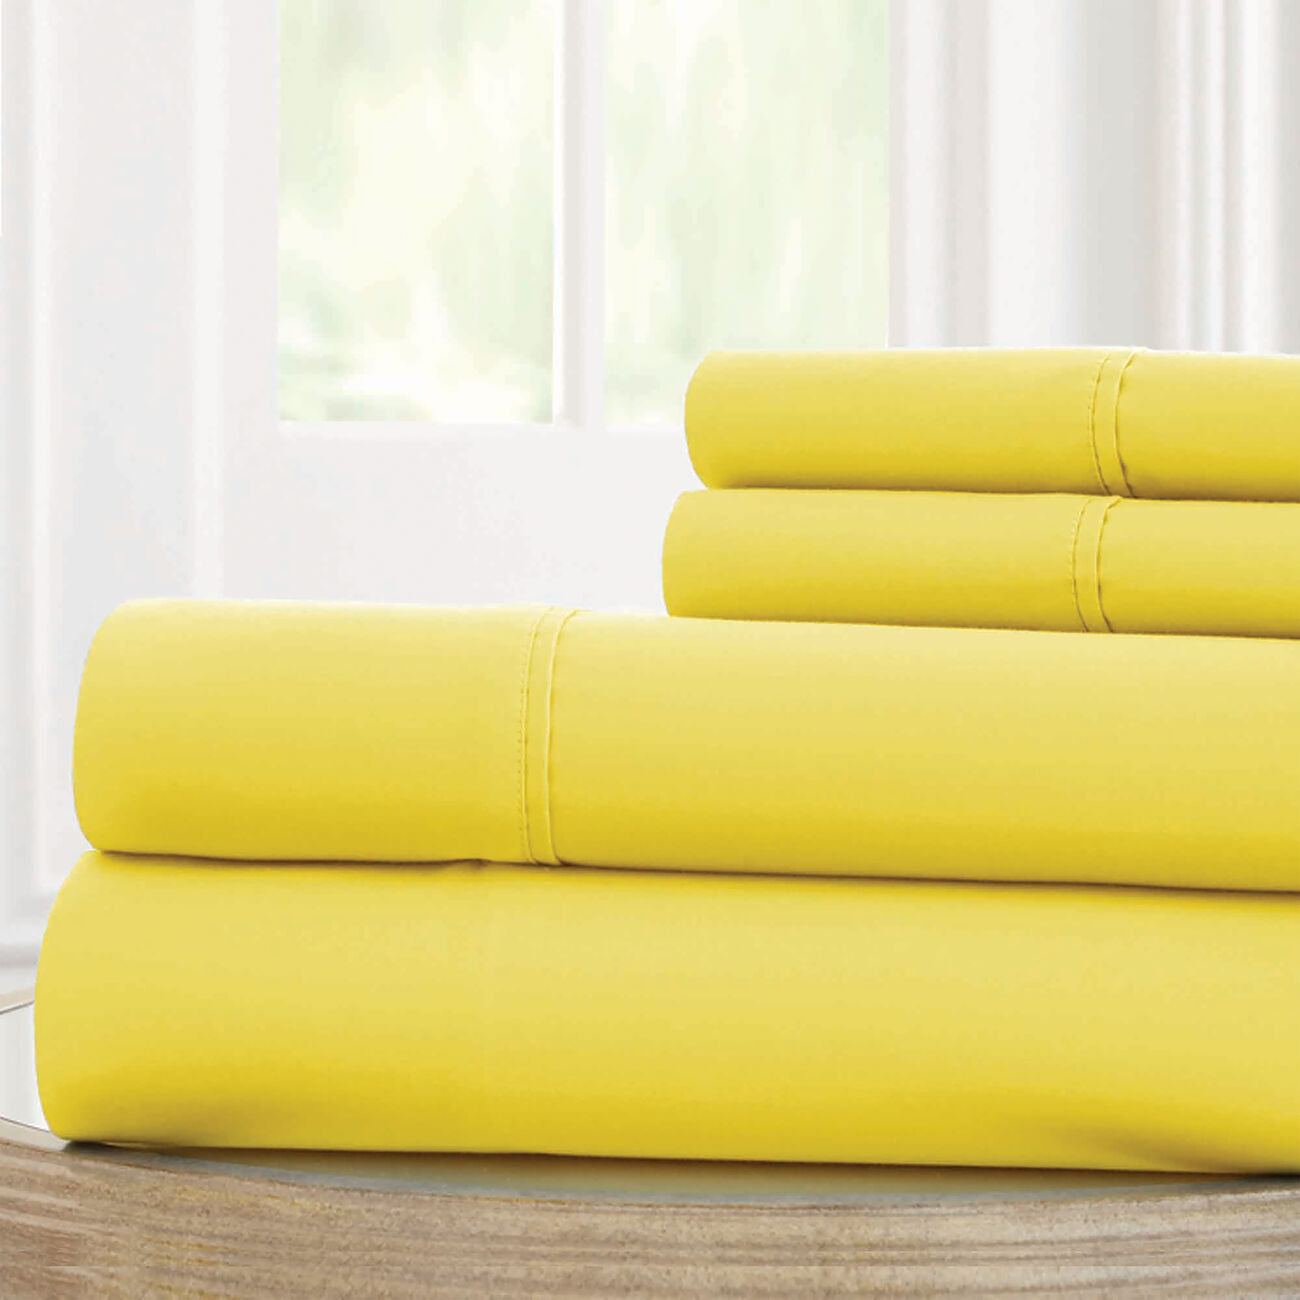 Bezons 4 Piece King Size Microfiber Sheet Set with 1800 Thread Count, Yellow